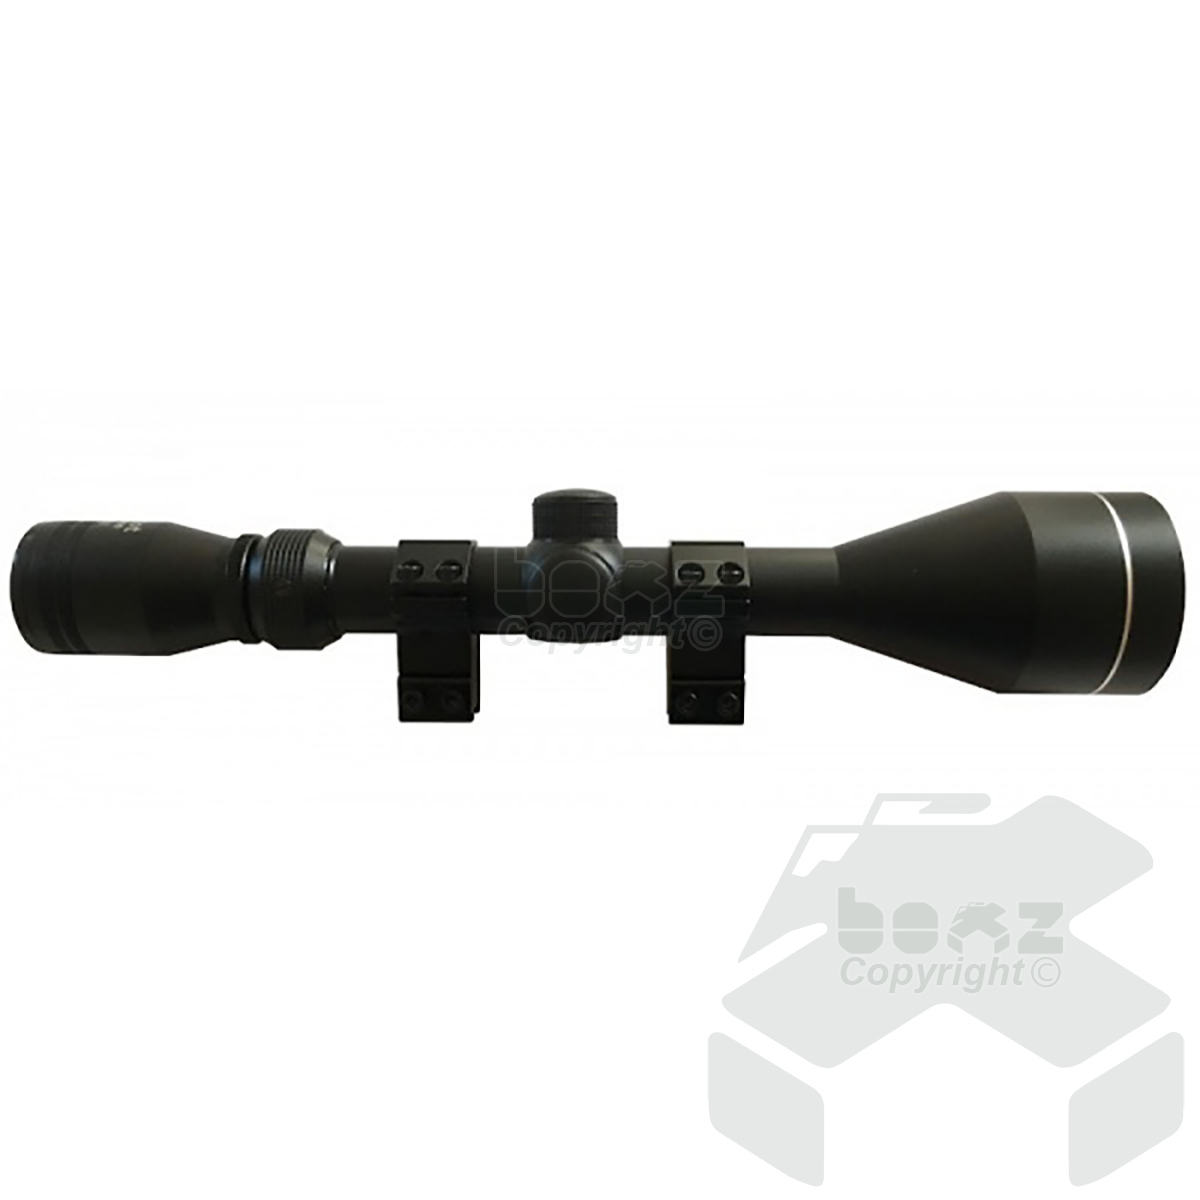 Proshot Precision 3-9x50 Scope with Two-piece Mounts